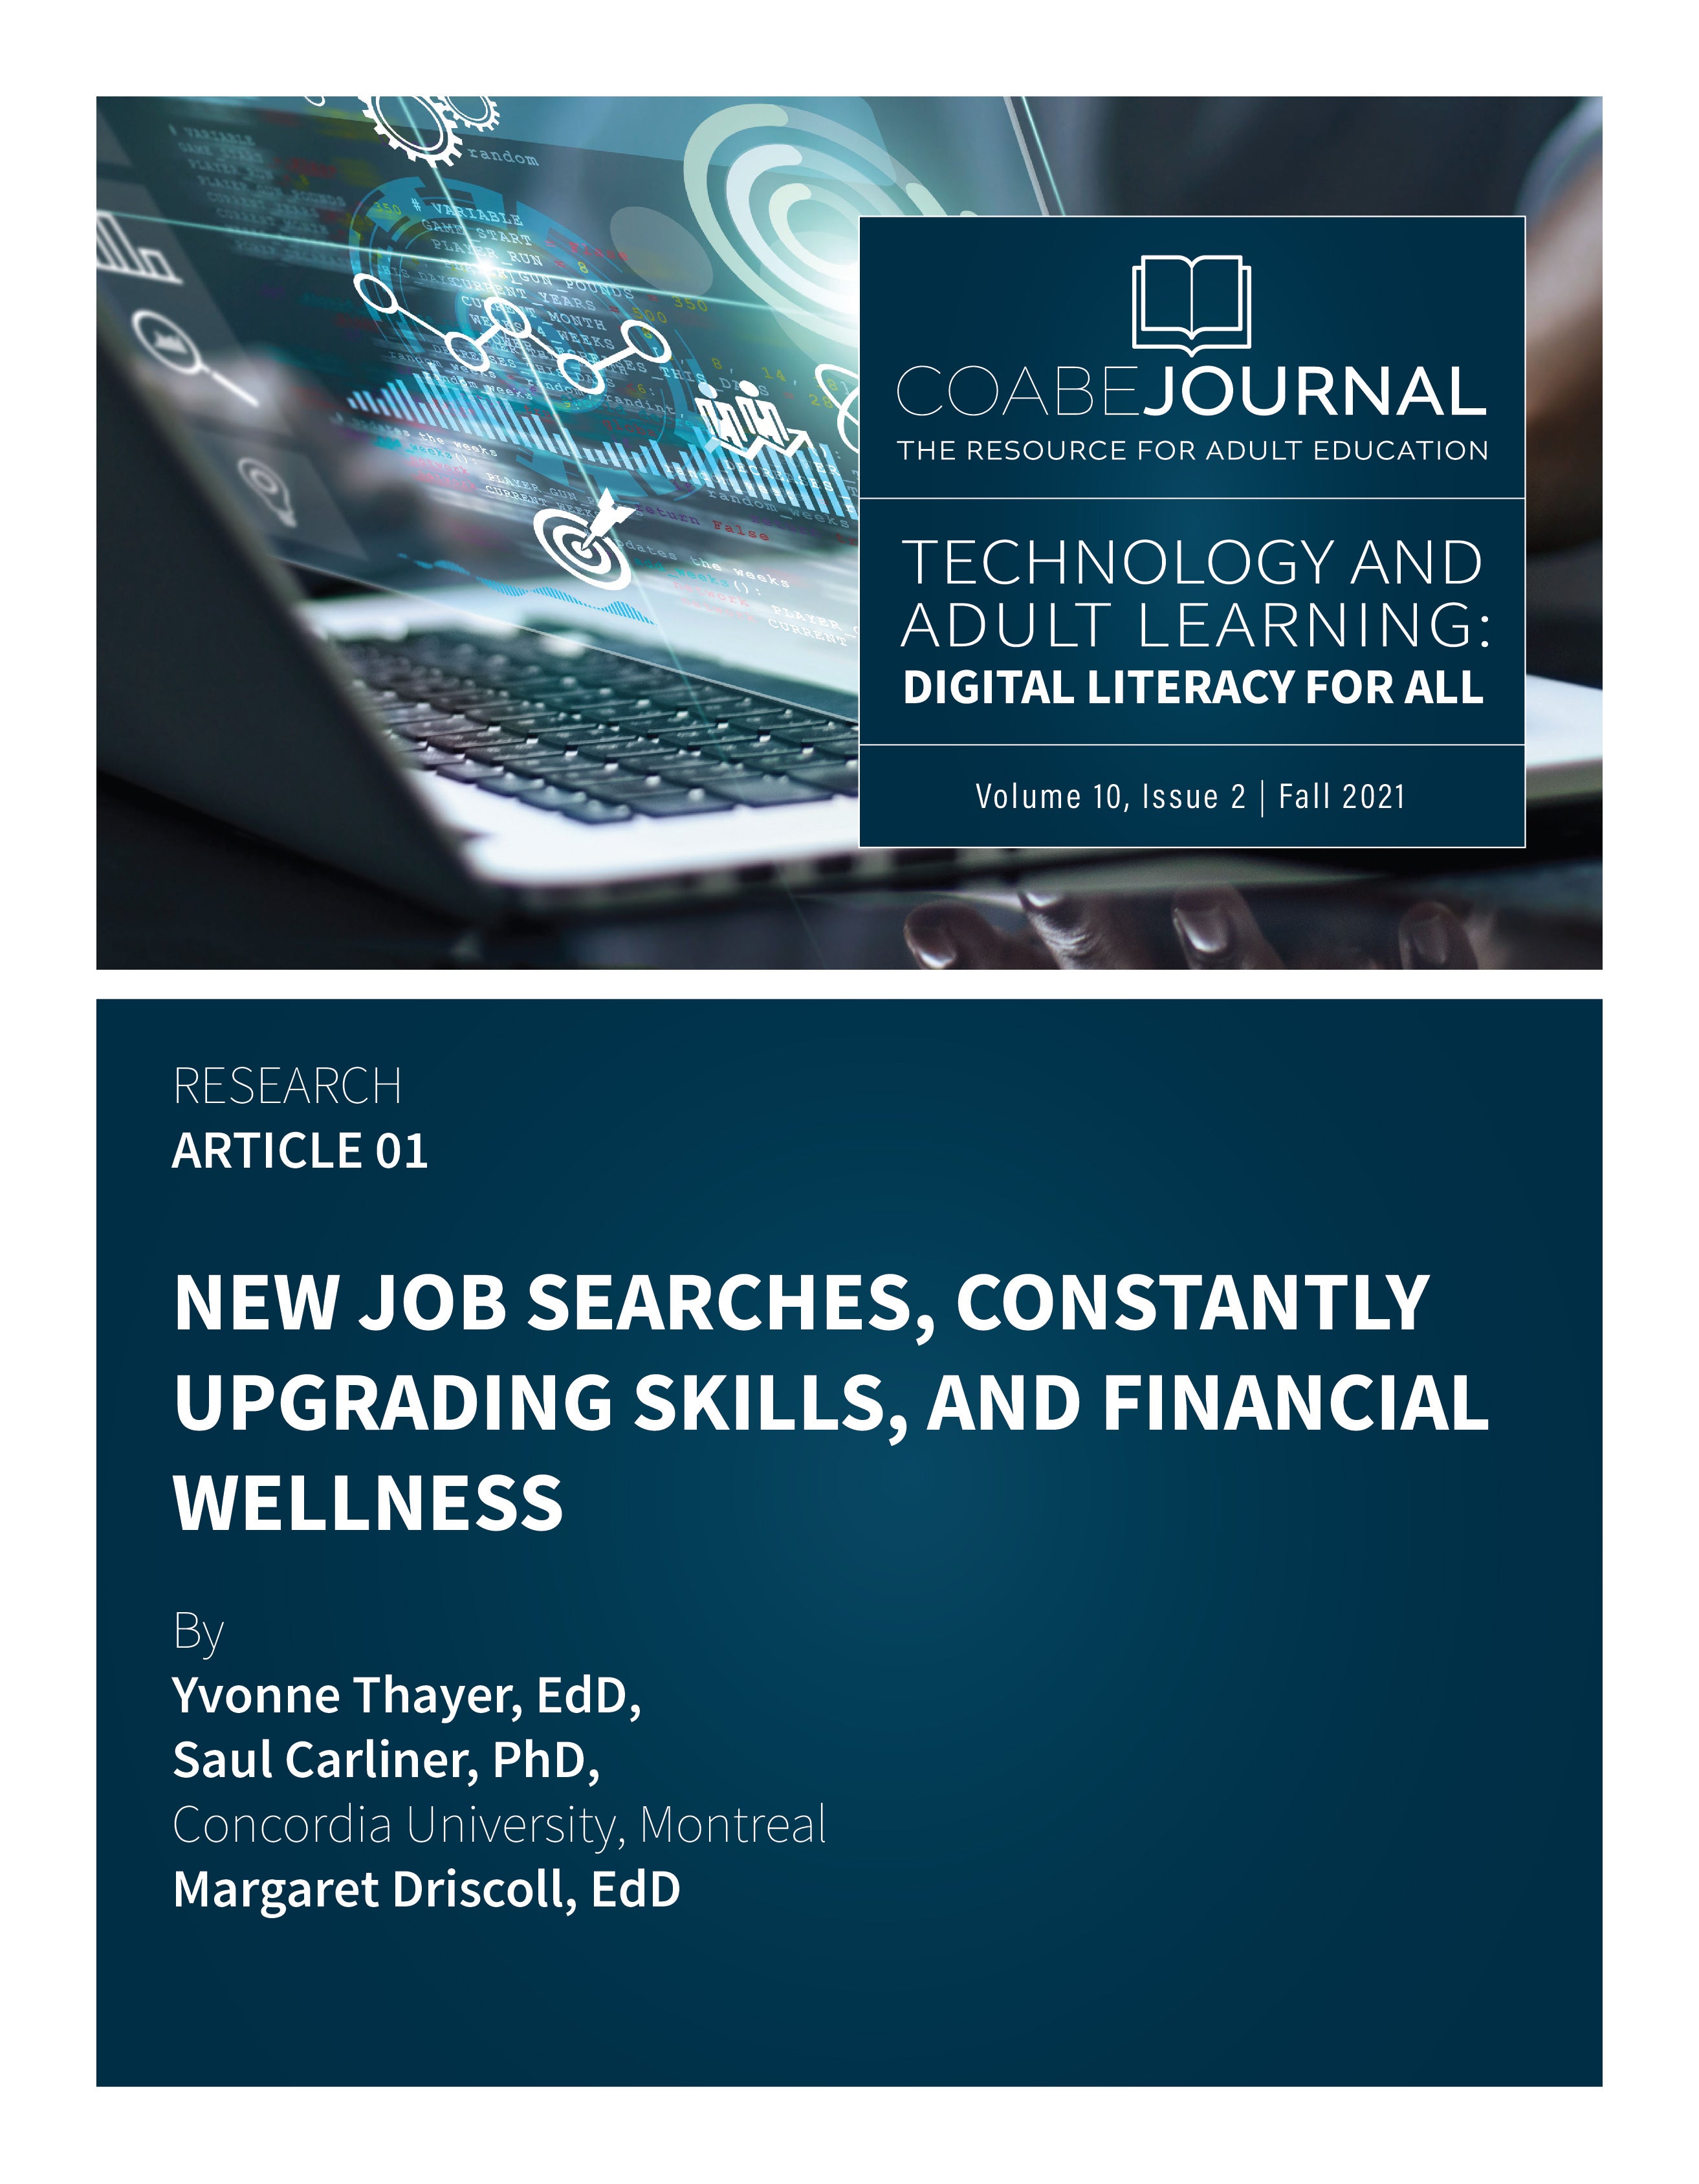 Article 01 | New Job Searches, Constantly Upgrading Skills, And Financial Wellness